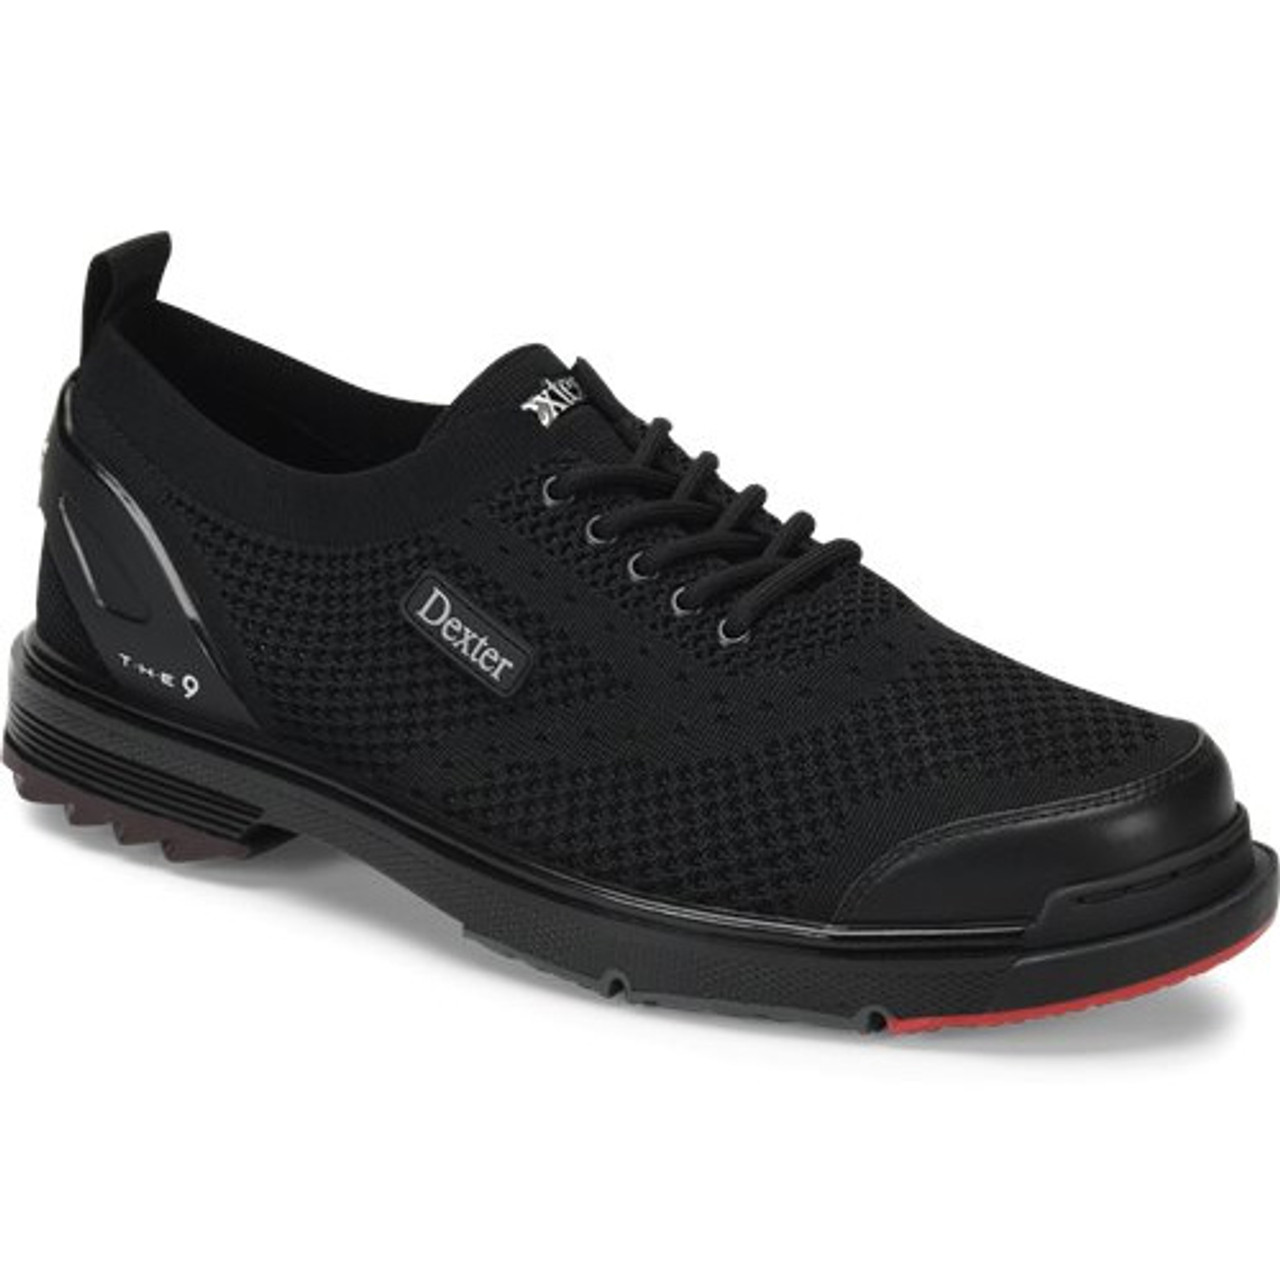 Dexter THE 9 ST Men's Bowling Shoes FREE SHIPPING - BuddiesProShop.com